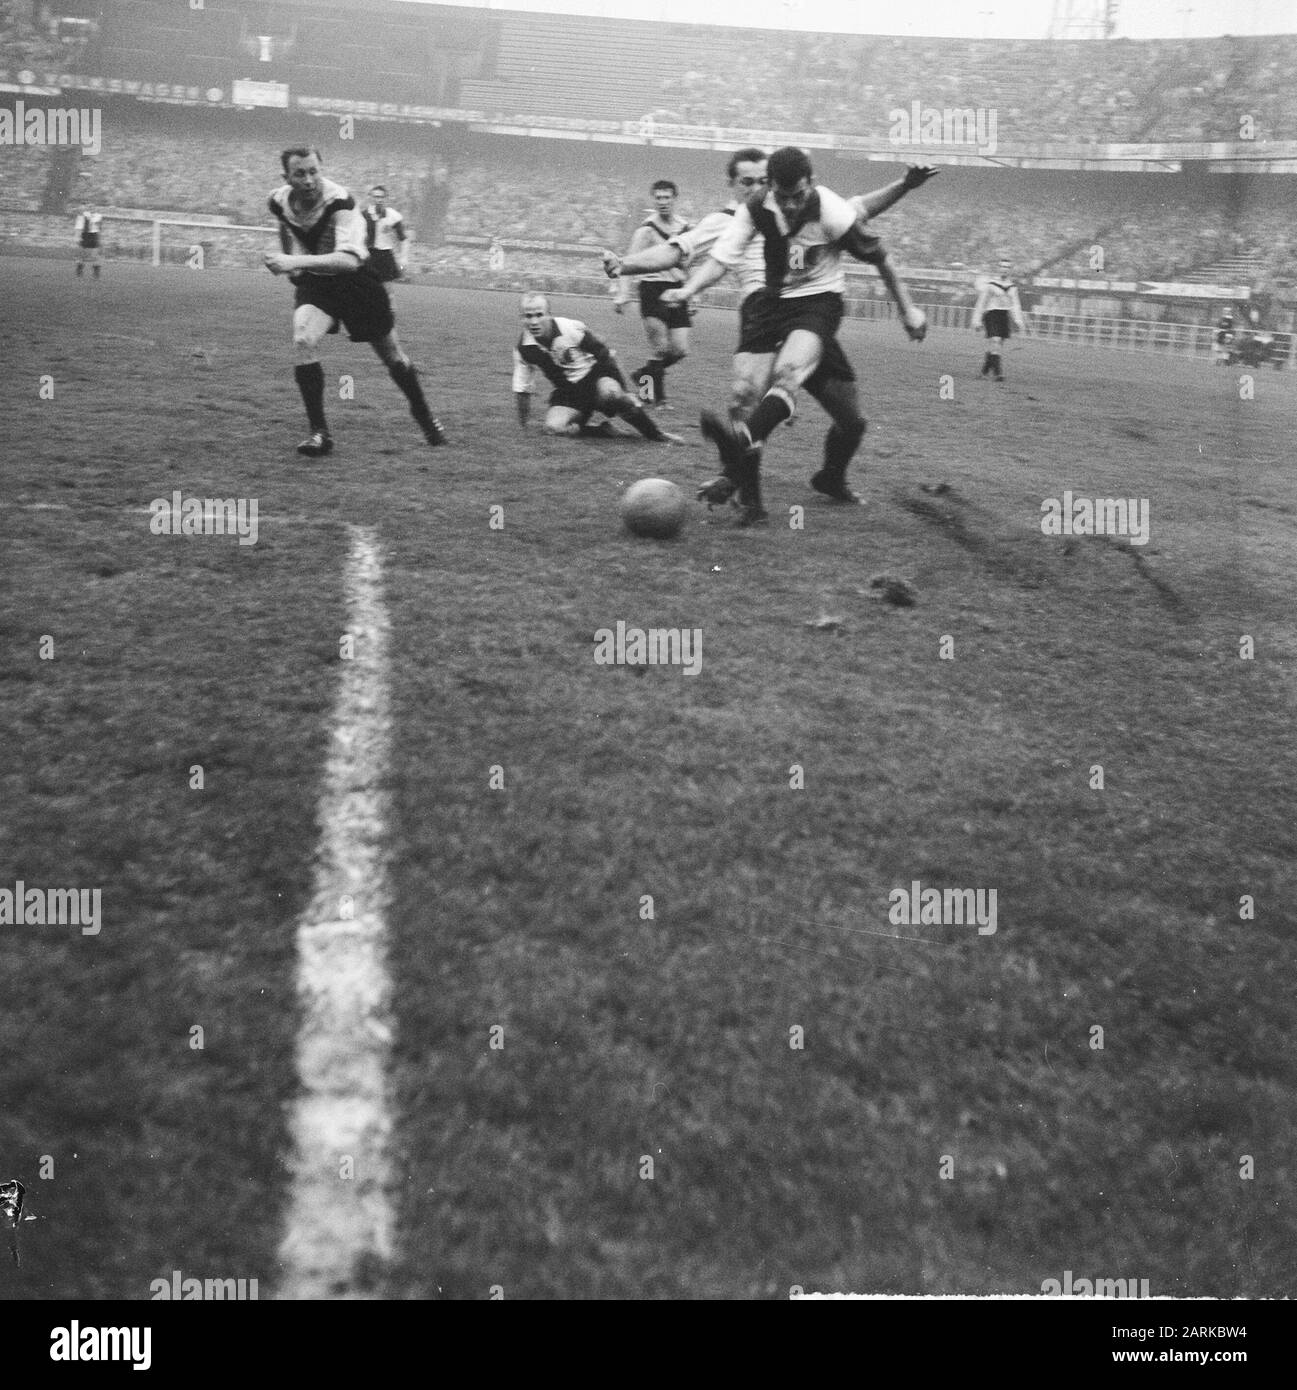 Feyenoord v DOS 4-3, Coen Moulijn in action Date: November 27, 1960 Location: Rotterdam, South-Holland Keywords: sport, football Personal name: Moulijn, Coen Institution name: Feyenoord Stock Photo